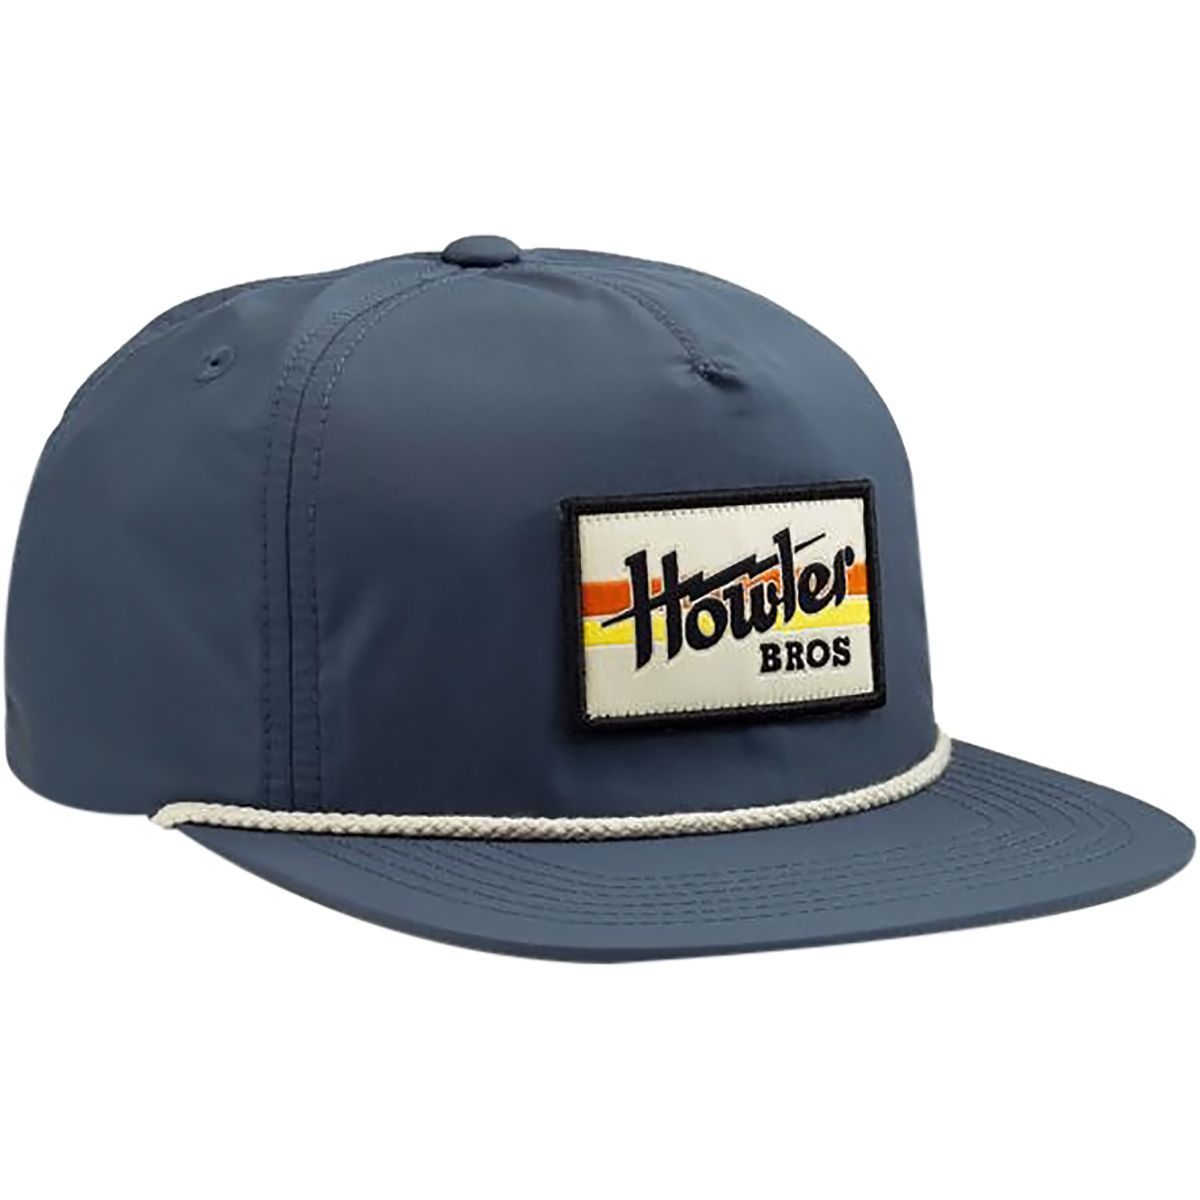 Howler Brothers Electric Stripe Snapback